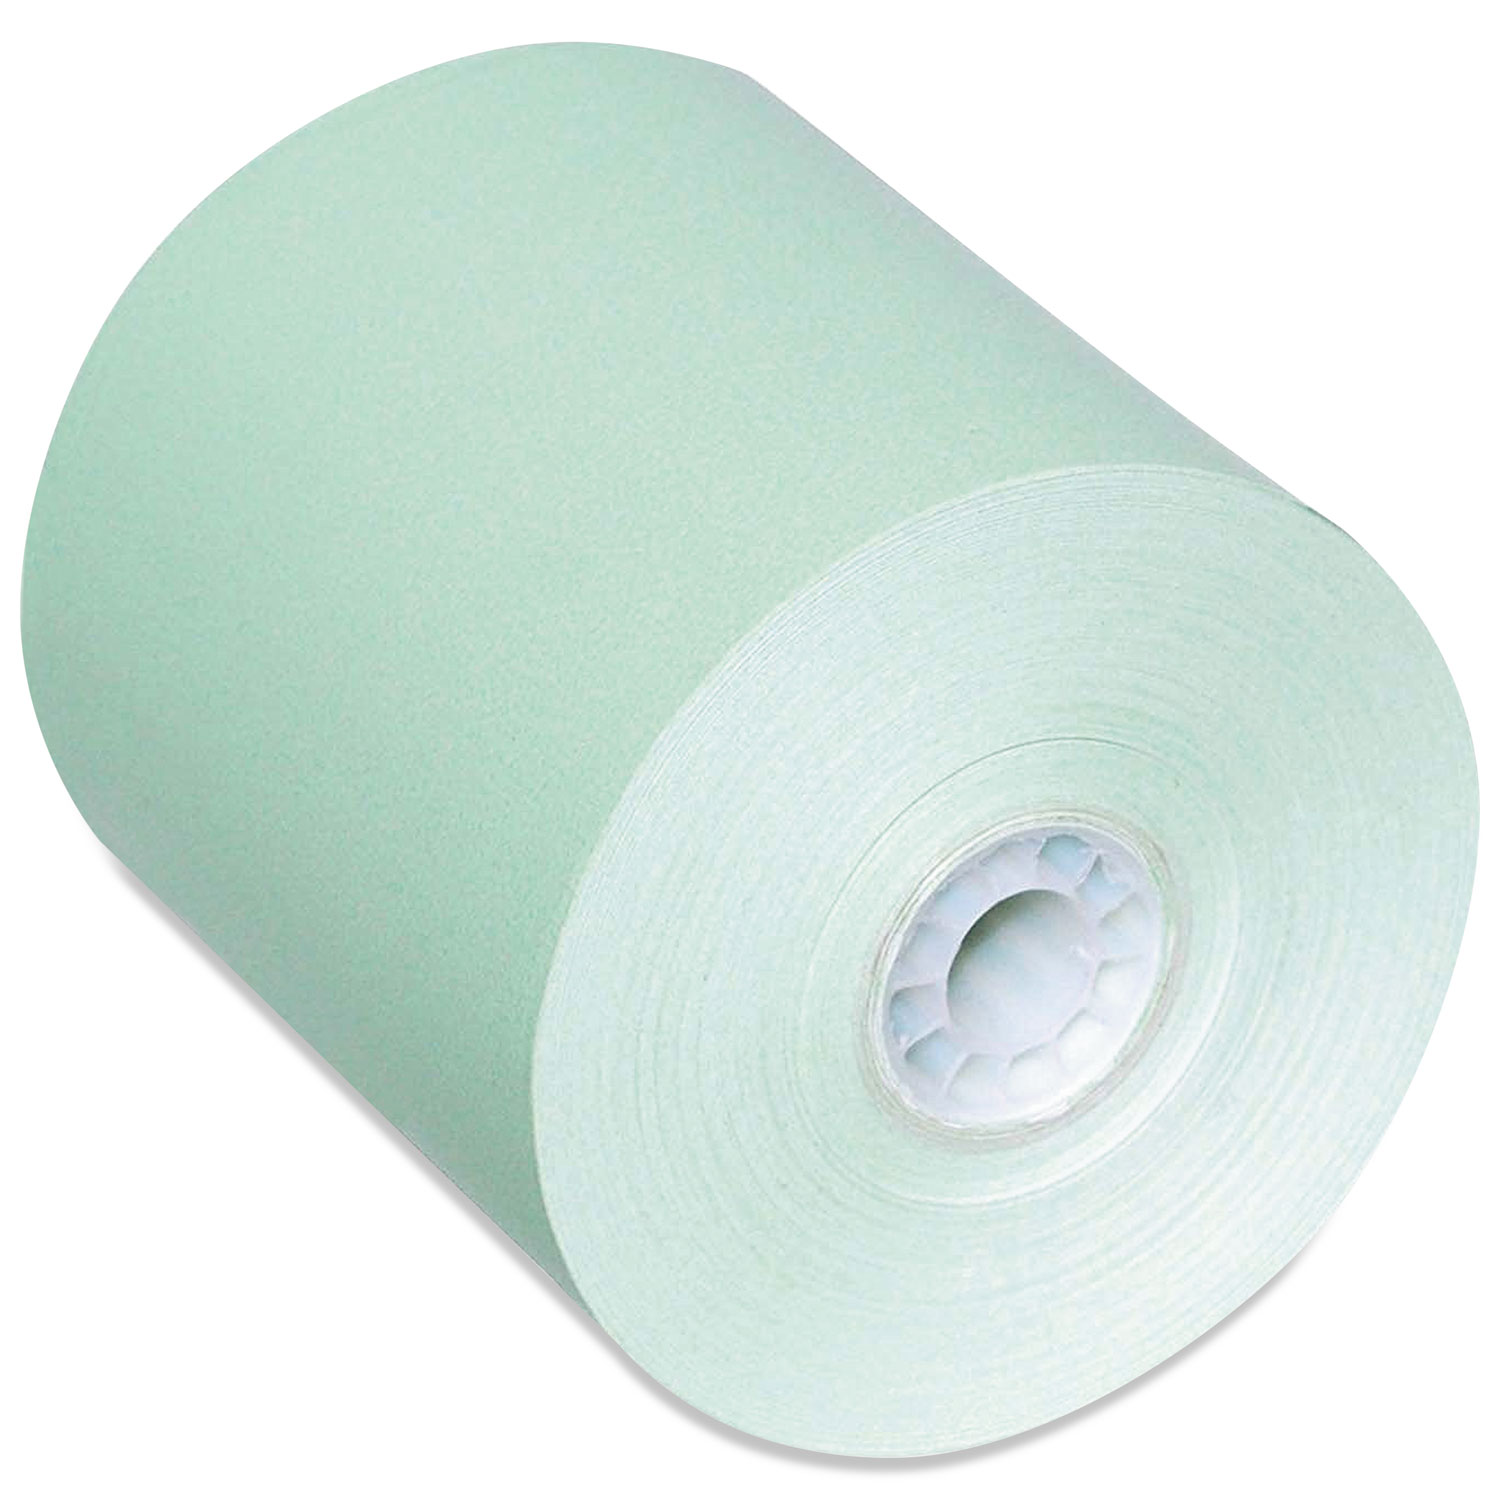  Iconex PMC05214G Direct Thermal Printing Paper Rolls, 0.45 Core, 3.13 x 230 ft, Green, 50/Carton (ICX90902197) 